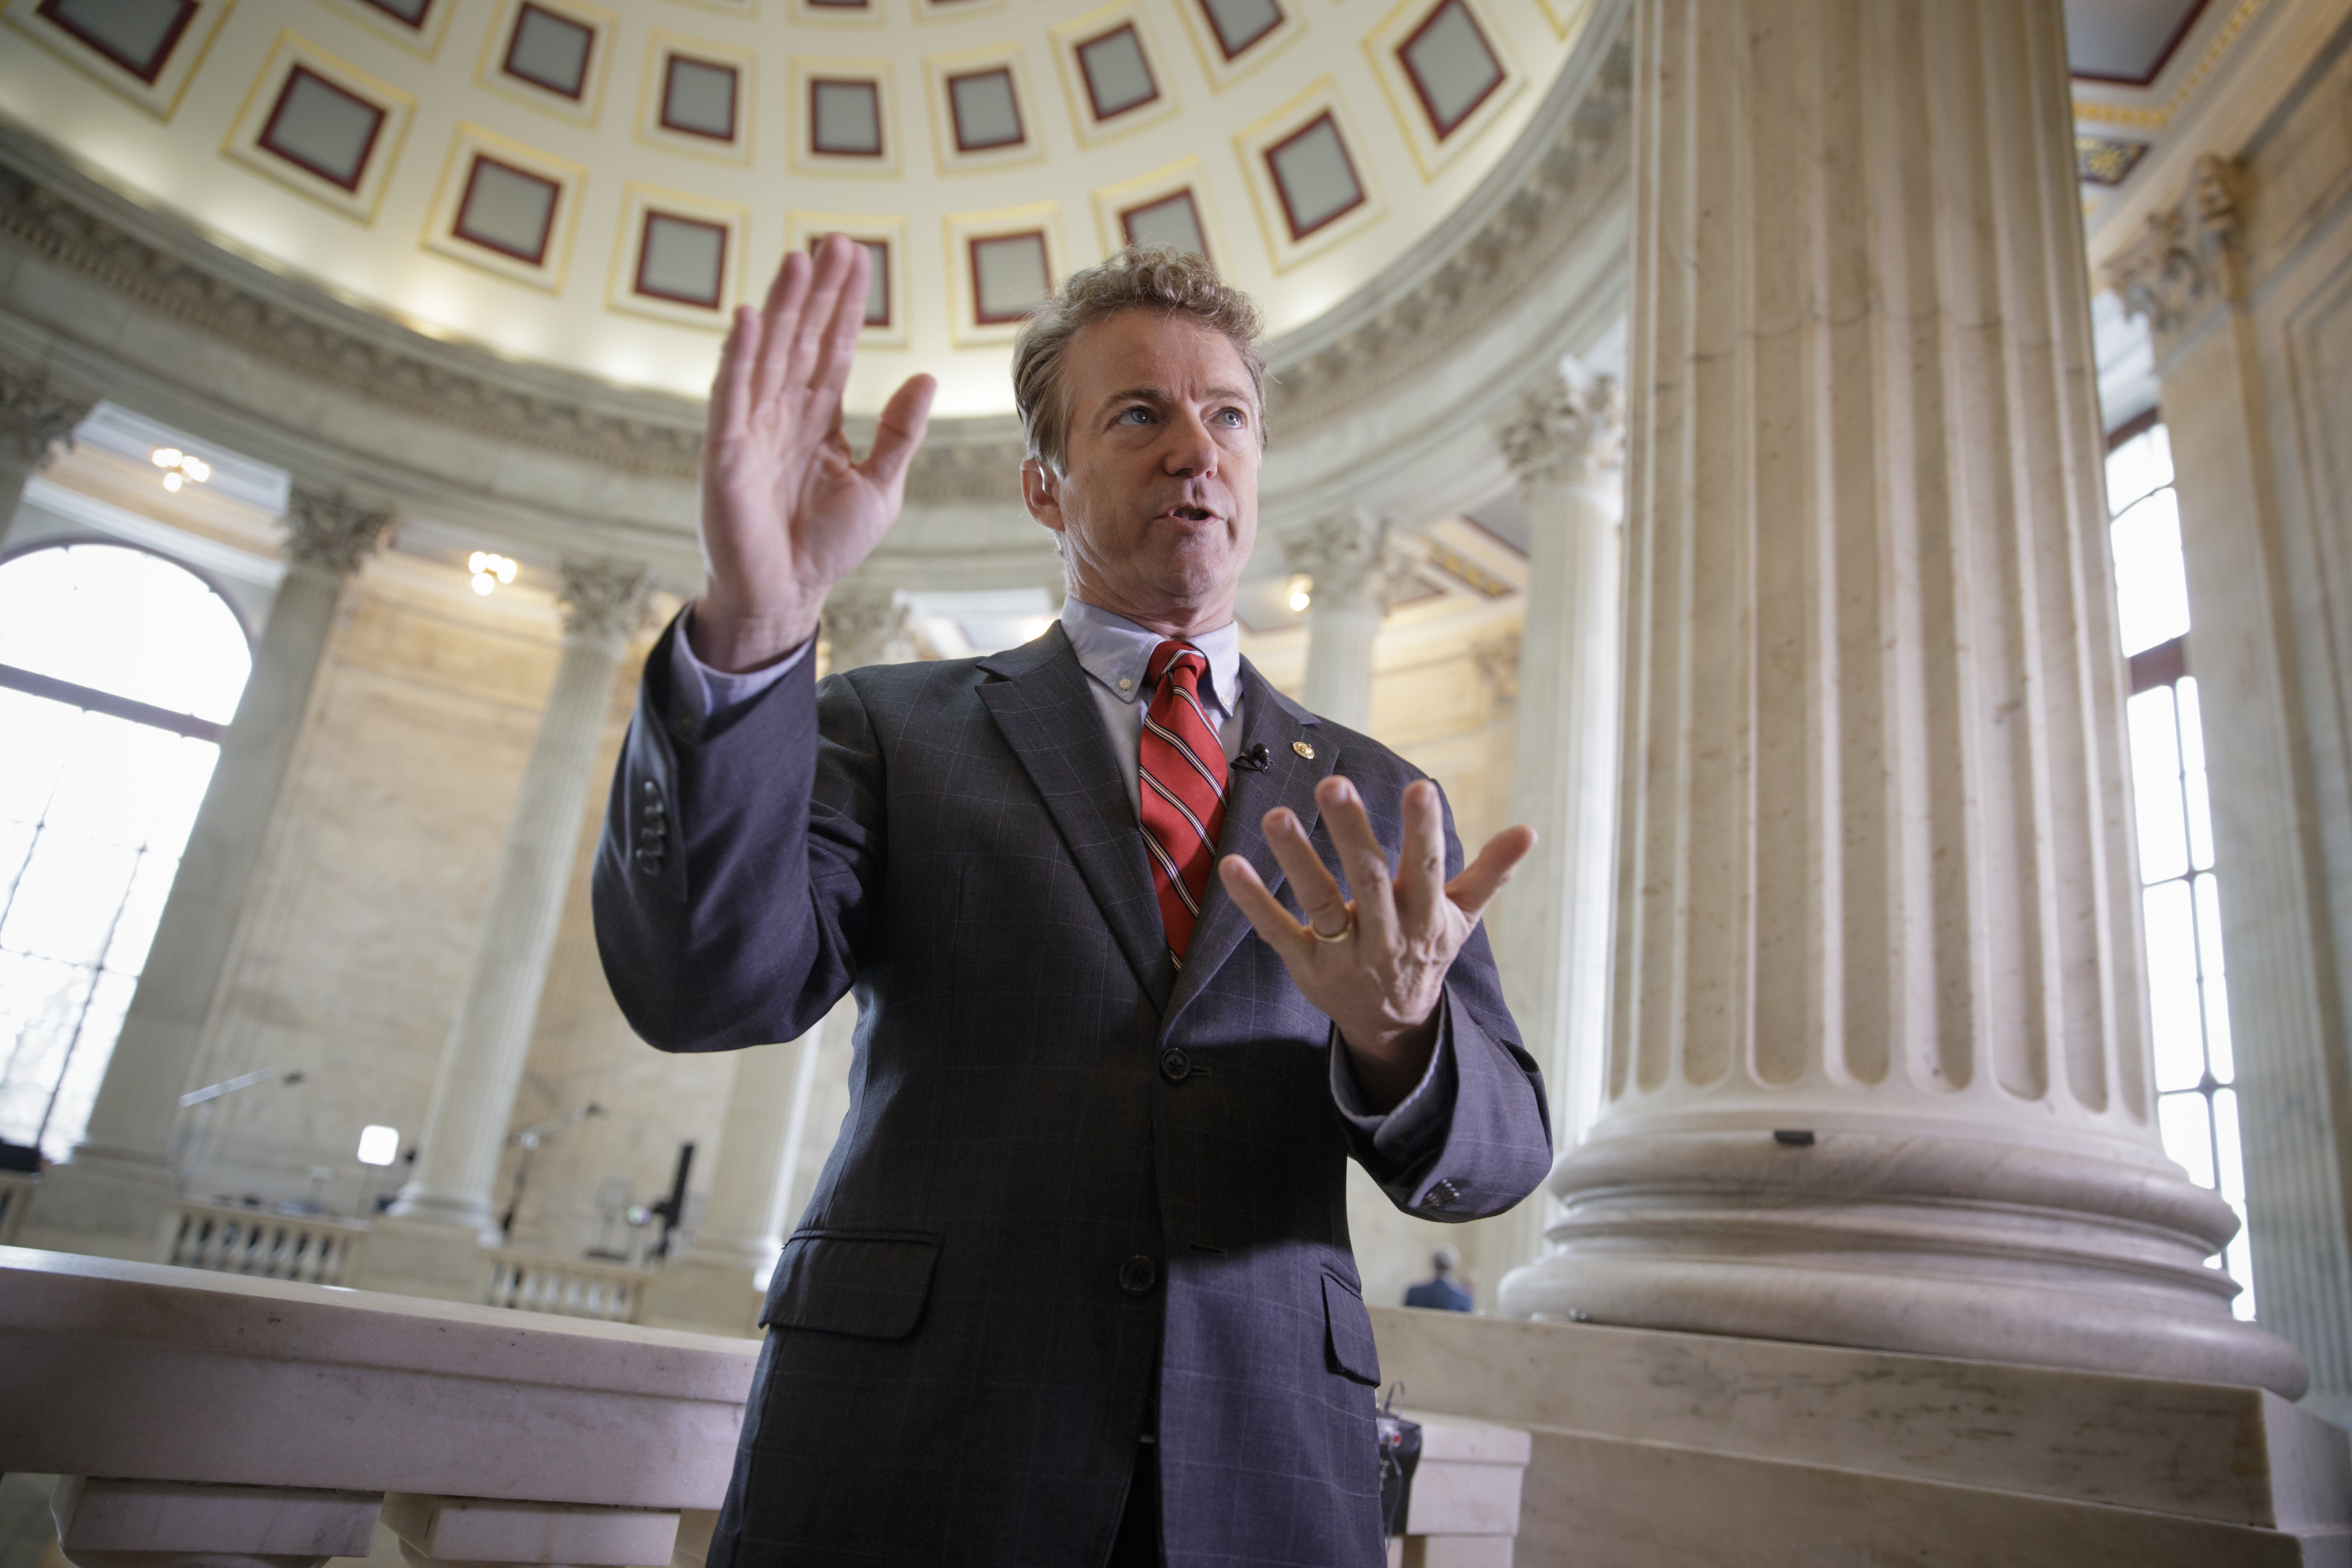 Sen. Rand Paul, R-Ky., an opponent of the House Republican healthcare reform plan, discusses the bill before a TV interview on Capitol Hill in Washington, Wednesday, March, 15, 2017. (J. Scott Applewhite—AP)